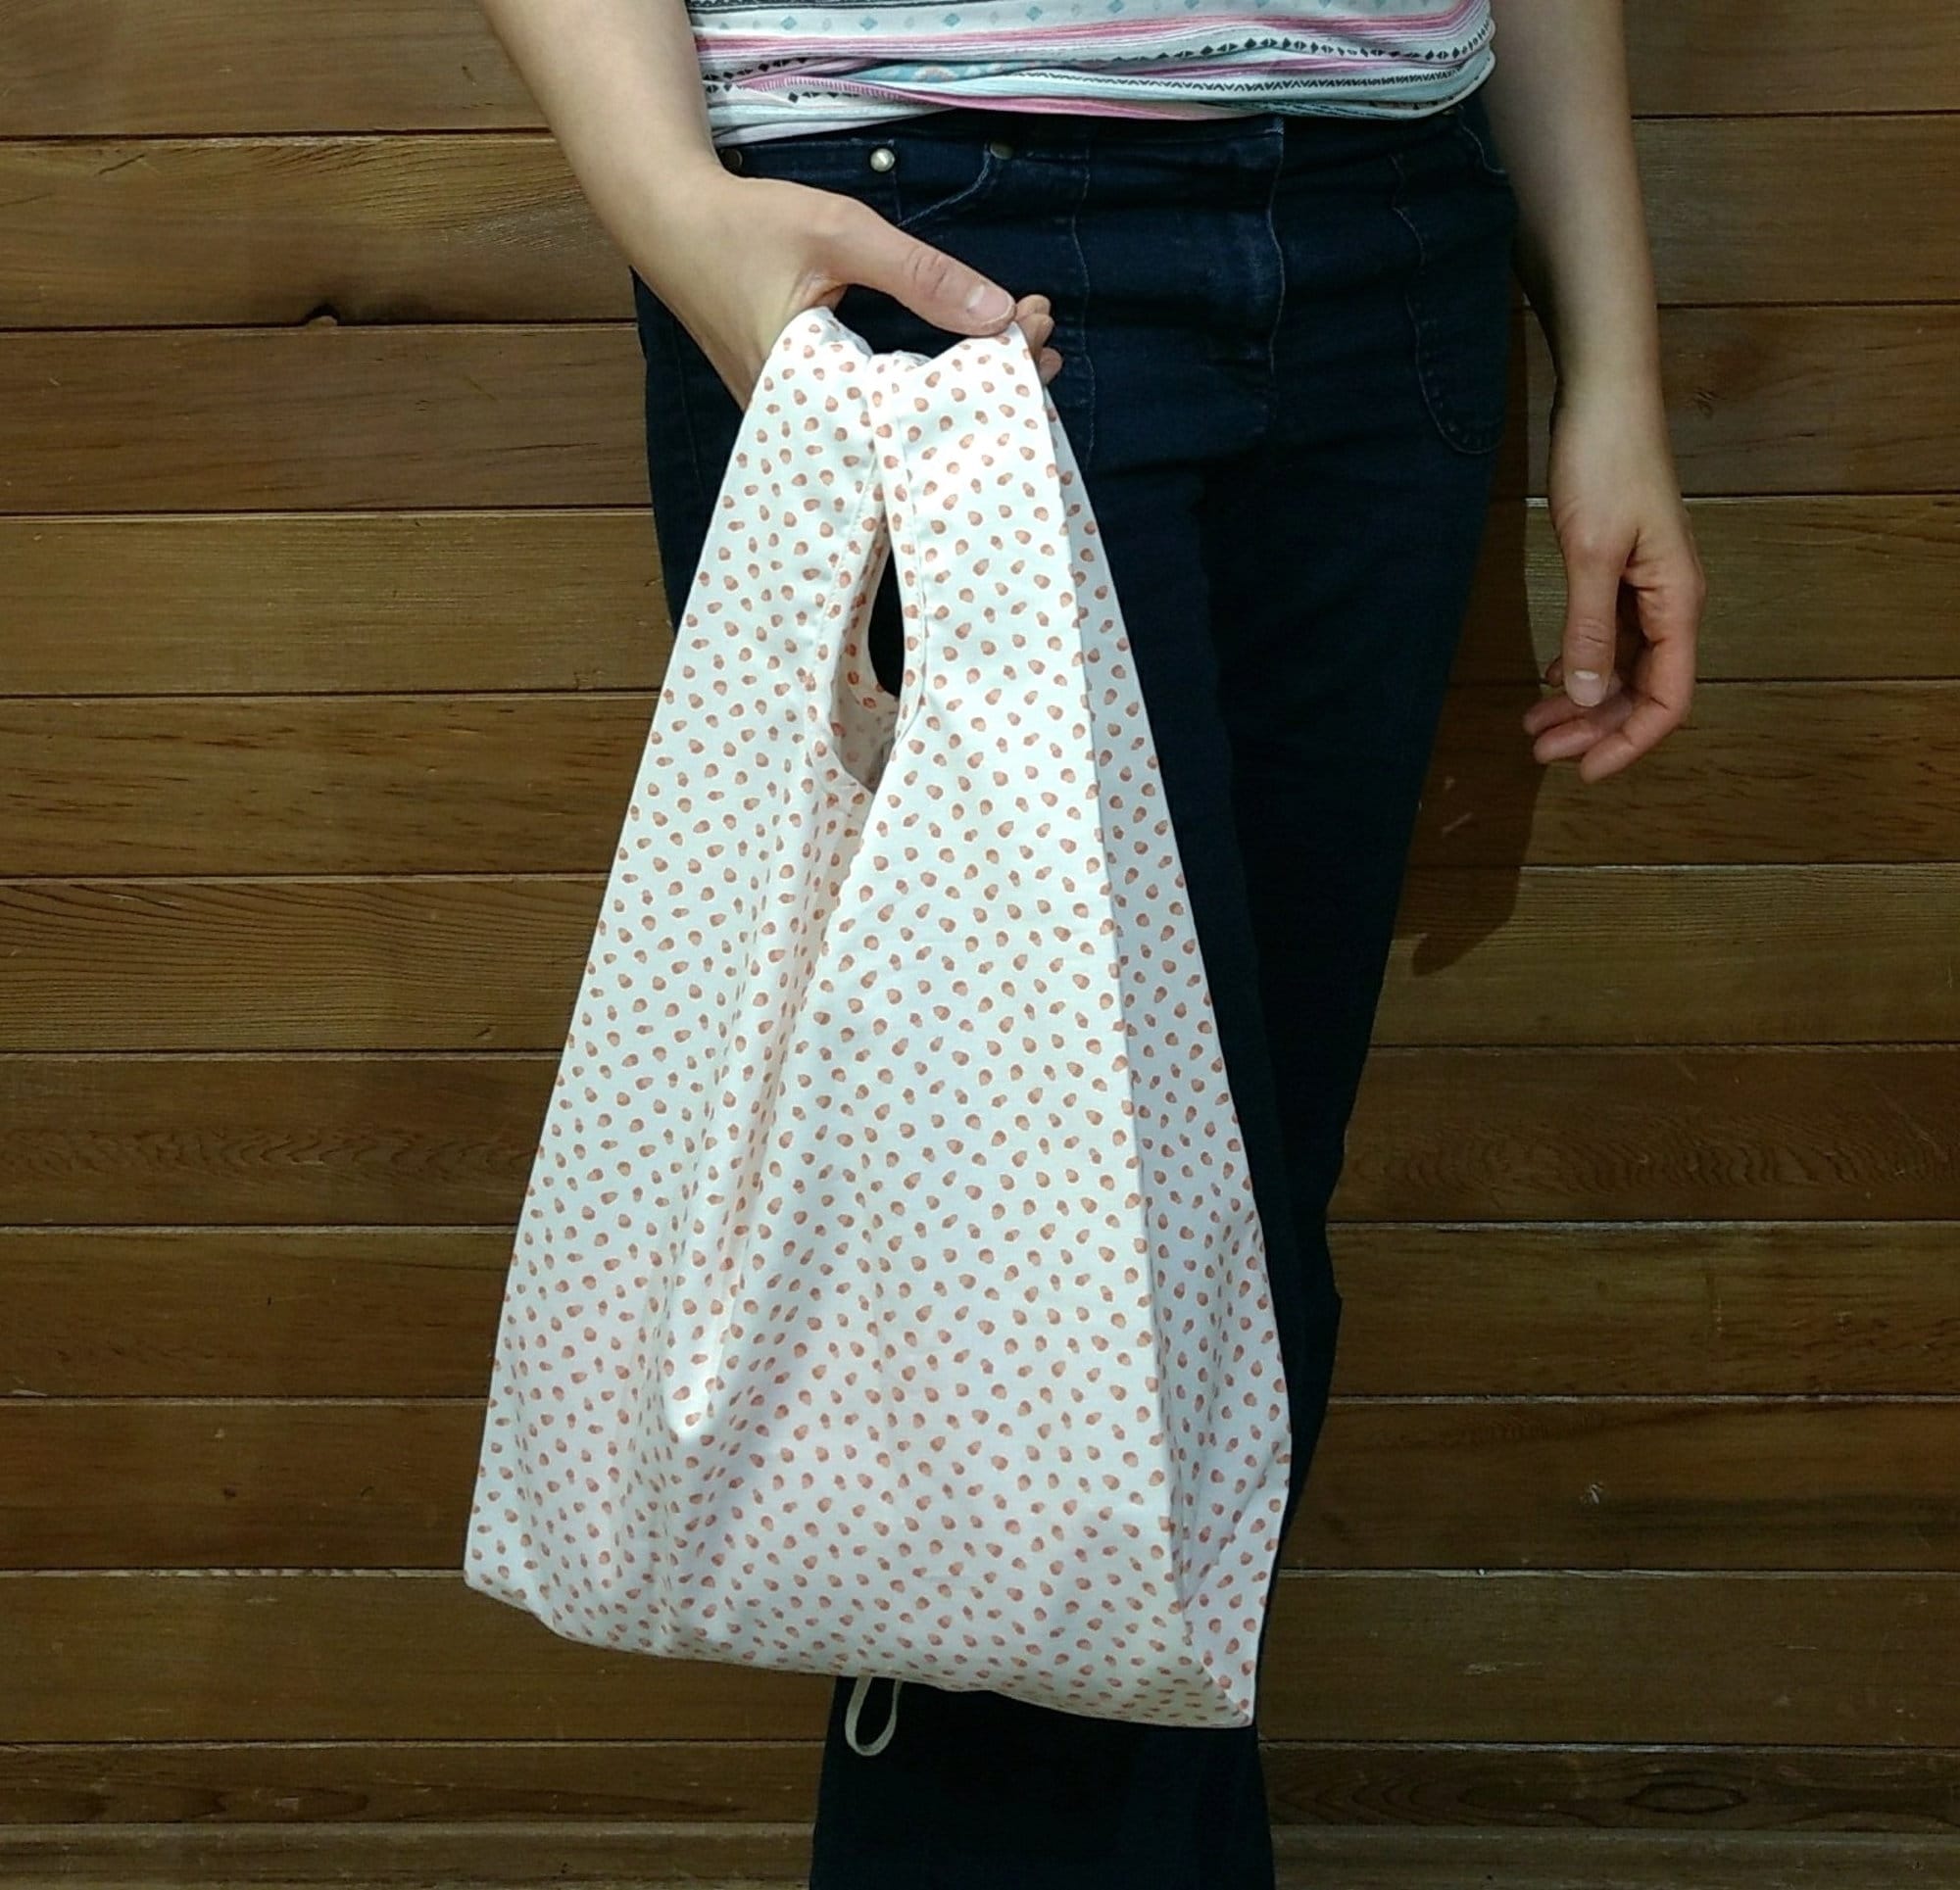 Folding Shopping Bag with attached Zipper Pocket Pouch, Recycled Nylon,  Ecobag, New York